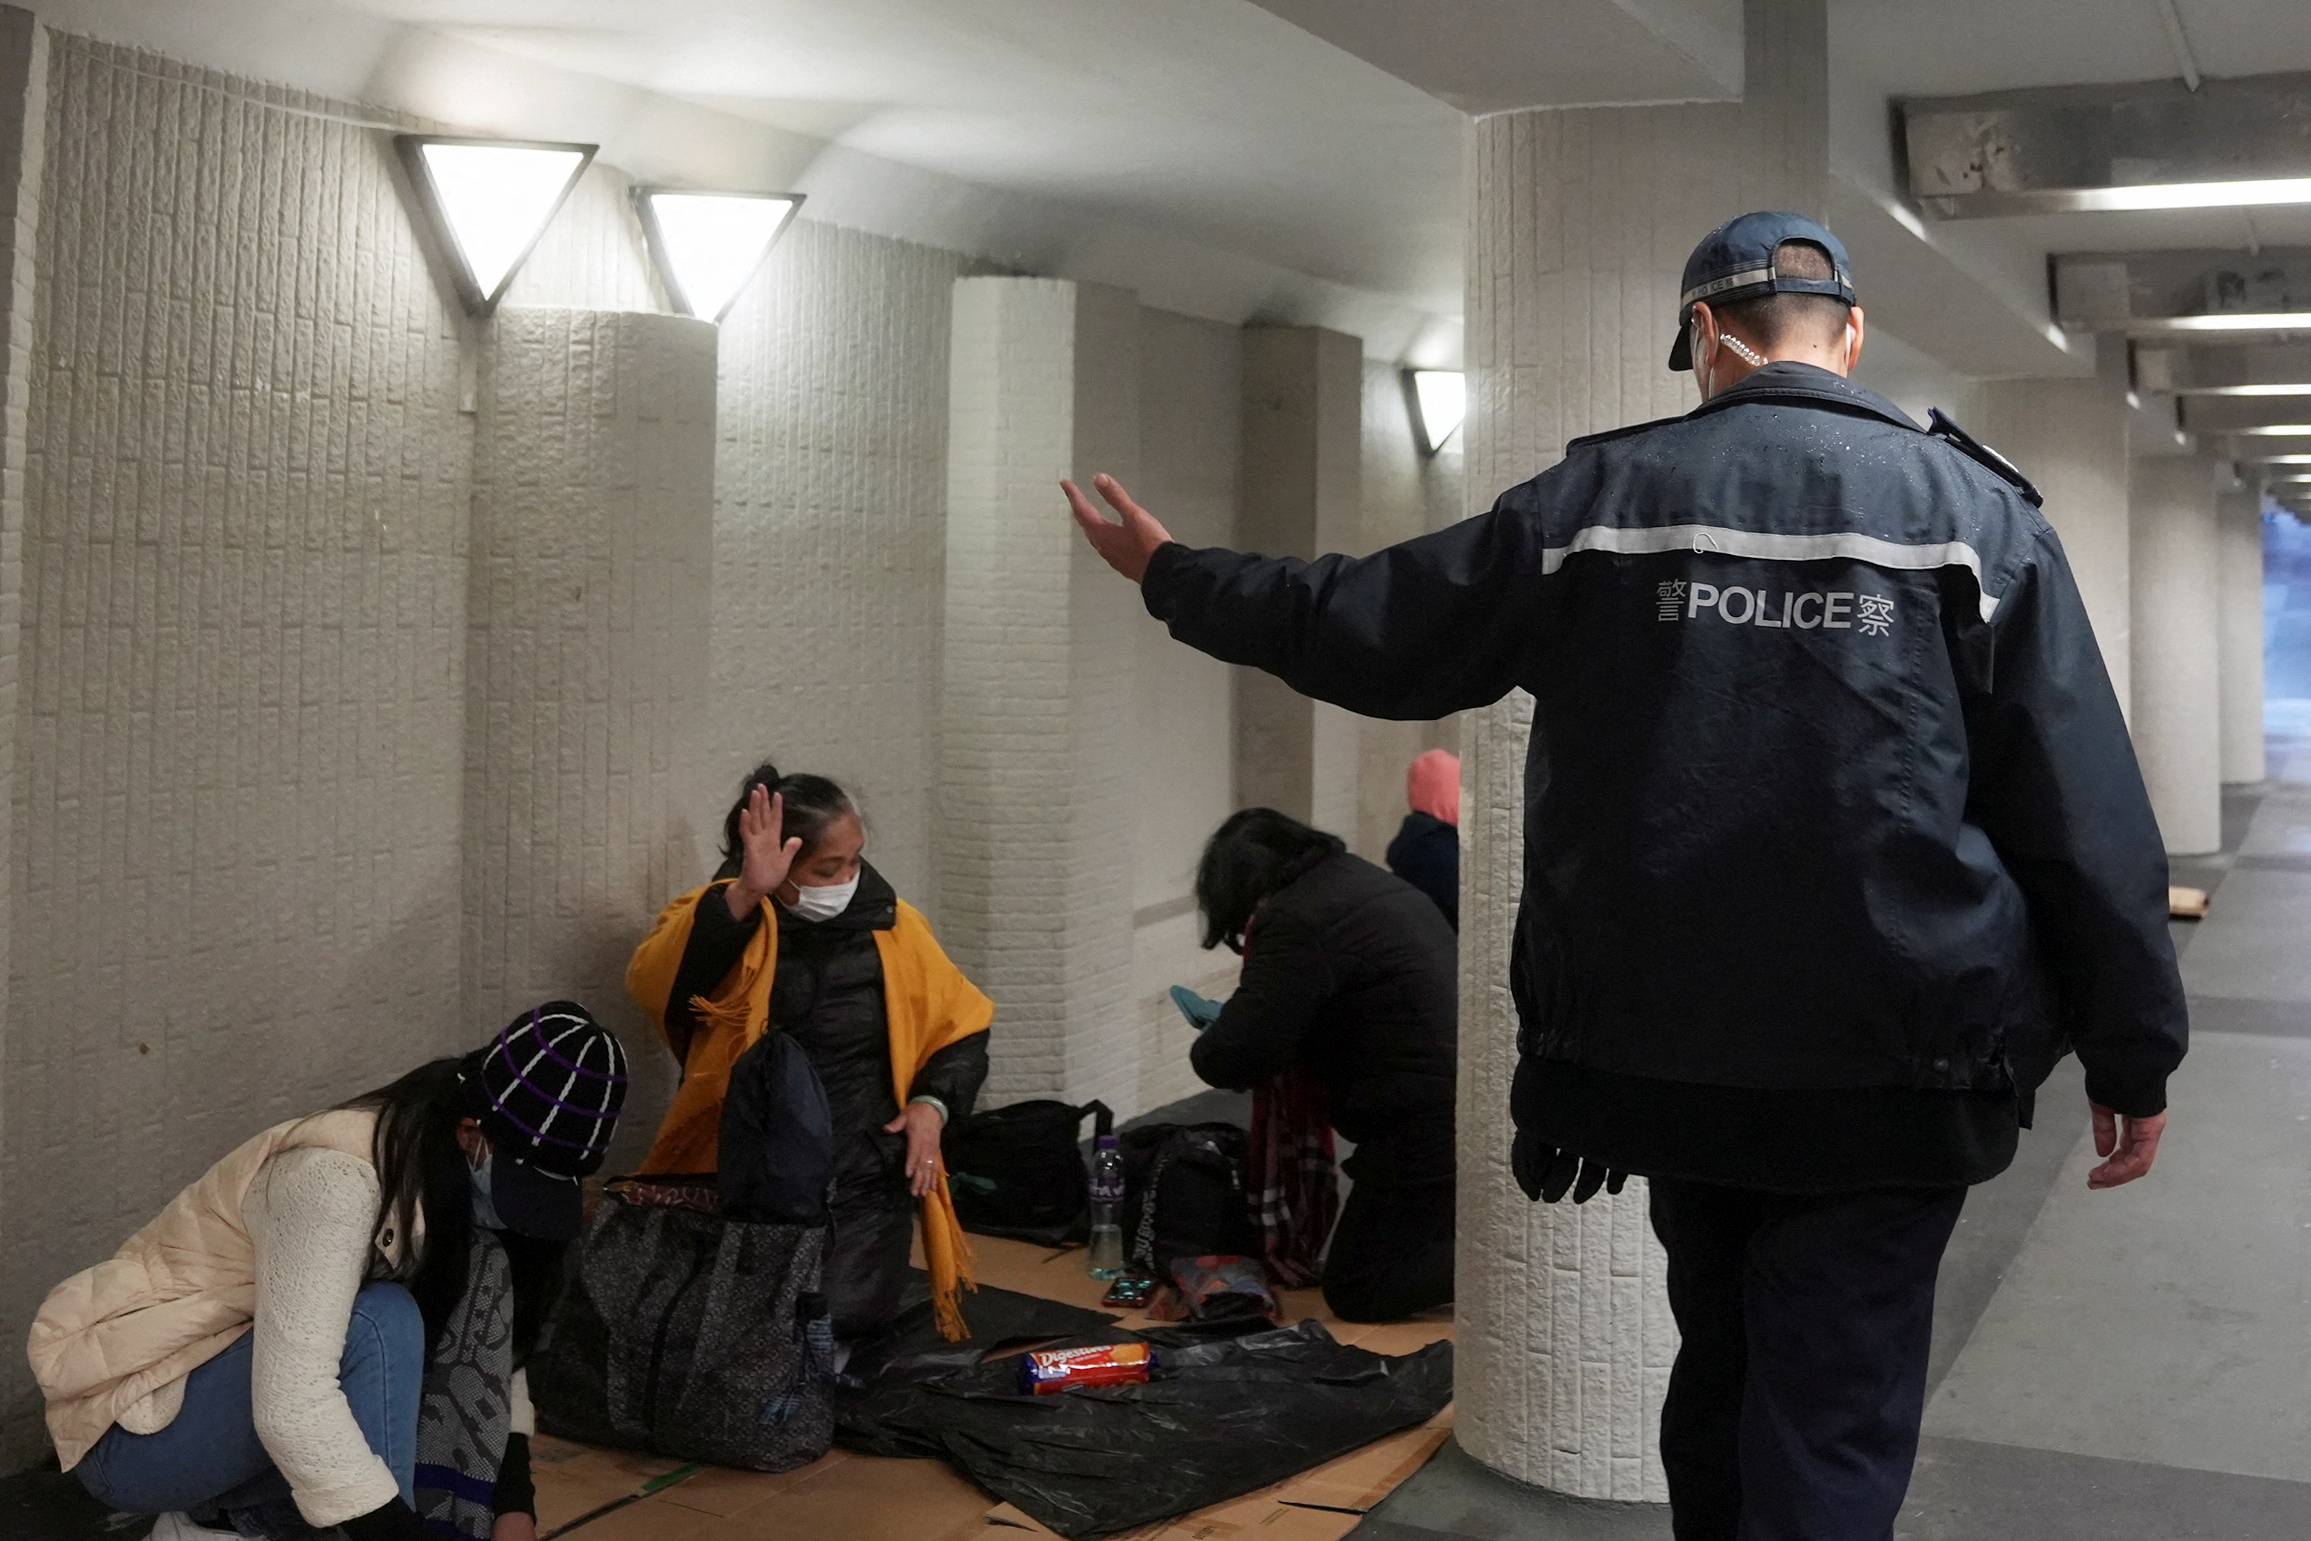 A police officer instructs domestic workers gathering on their rest day to leave, during a coronavirus disease (COVID-19) outbreak in Hong Kong, China